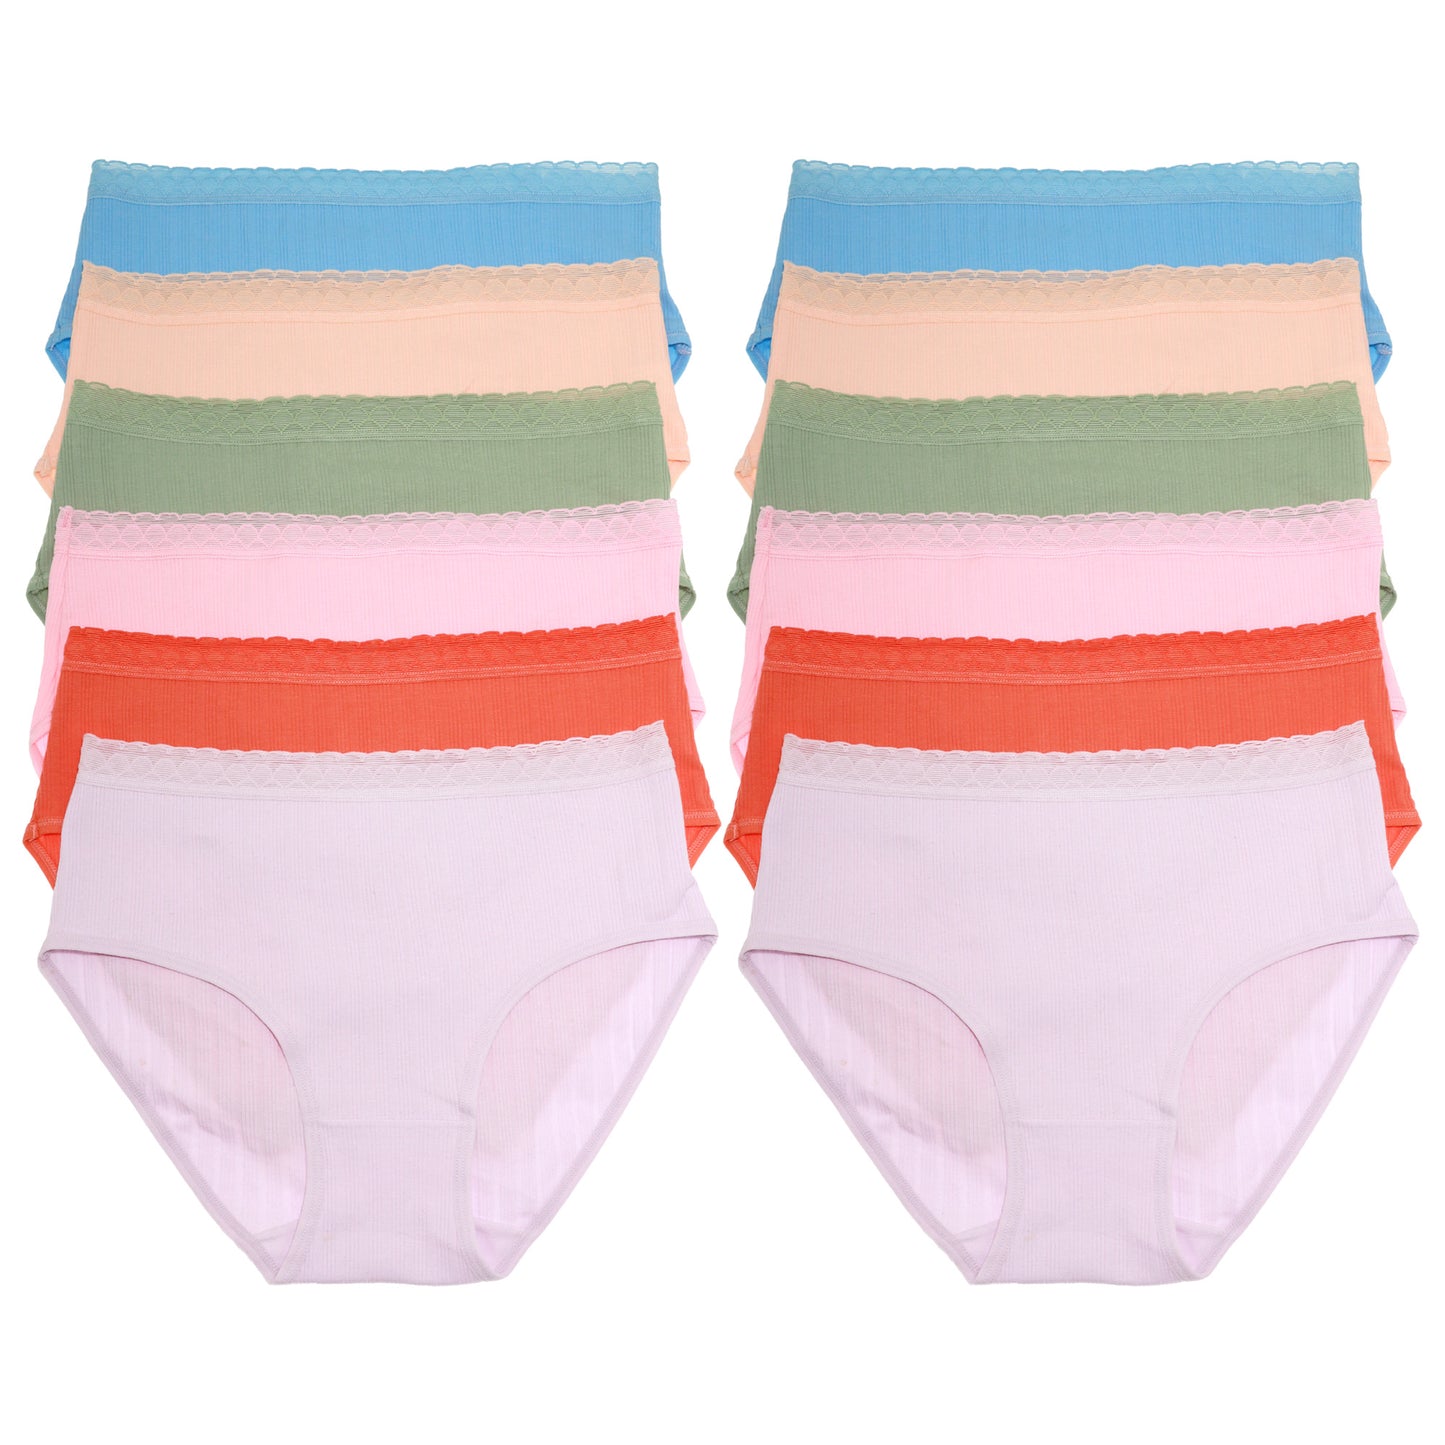 Angelina Mid-Rise Cotton Panties with Scalloped Waistband (12-Pack), #G6820